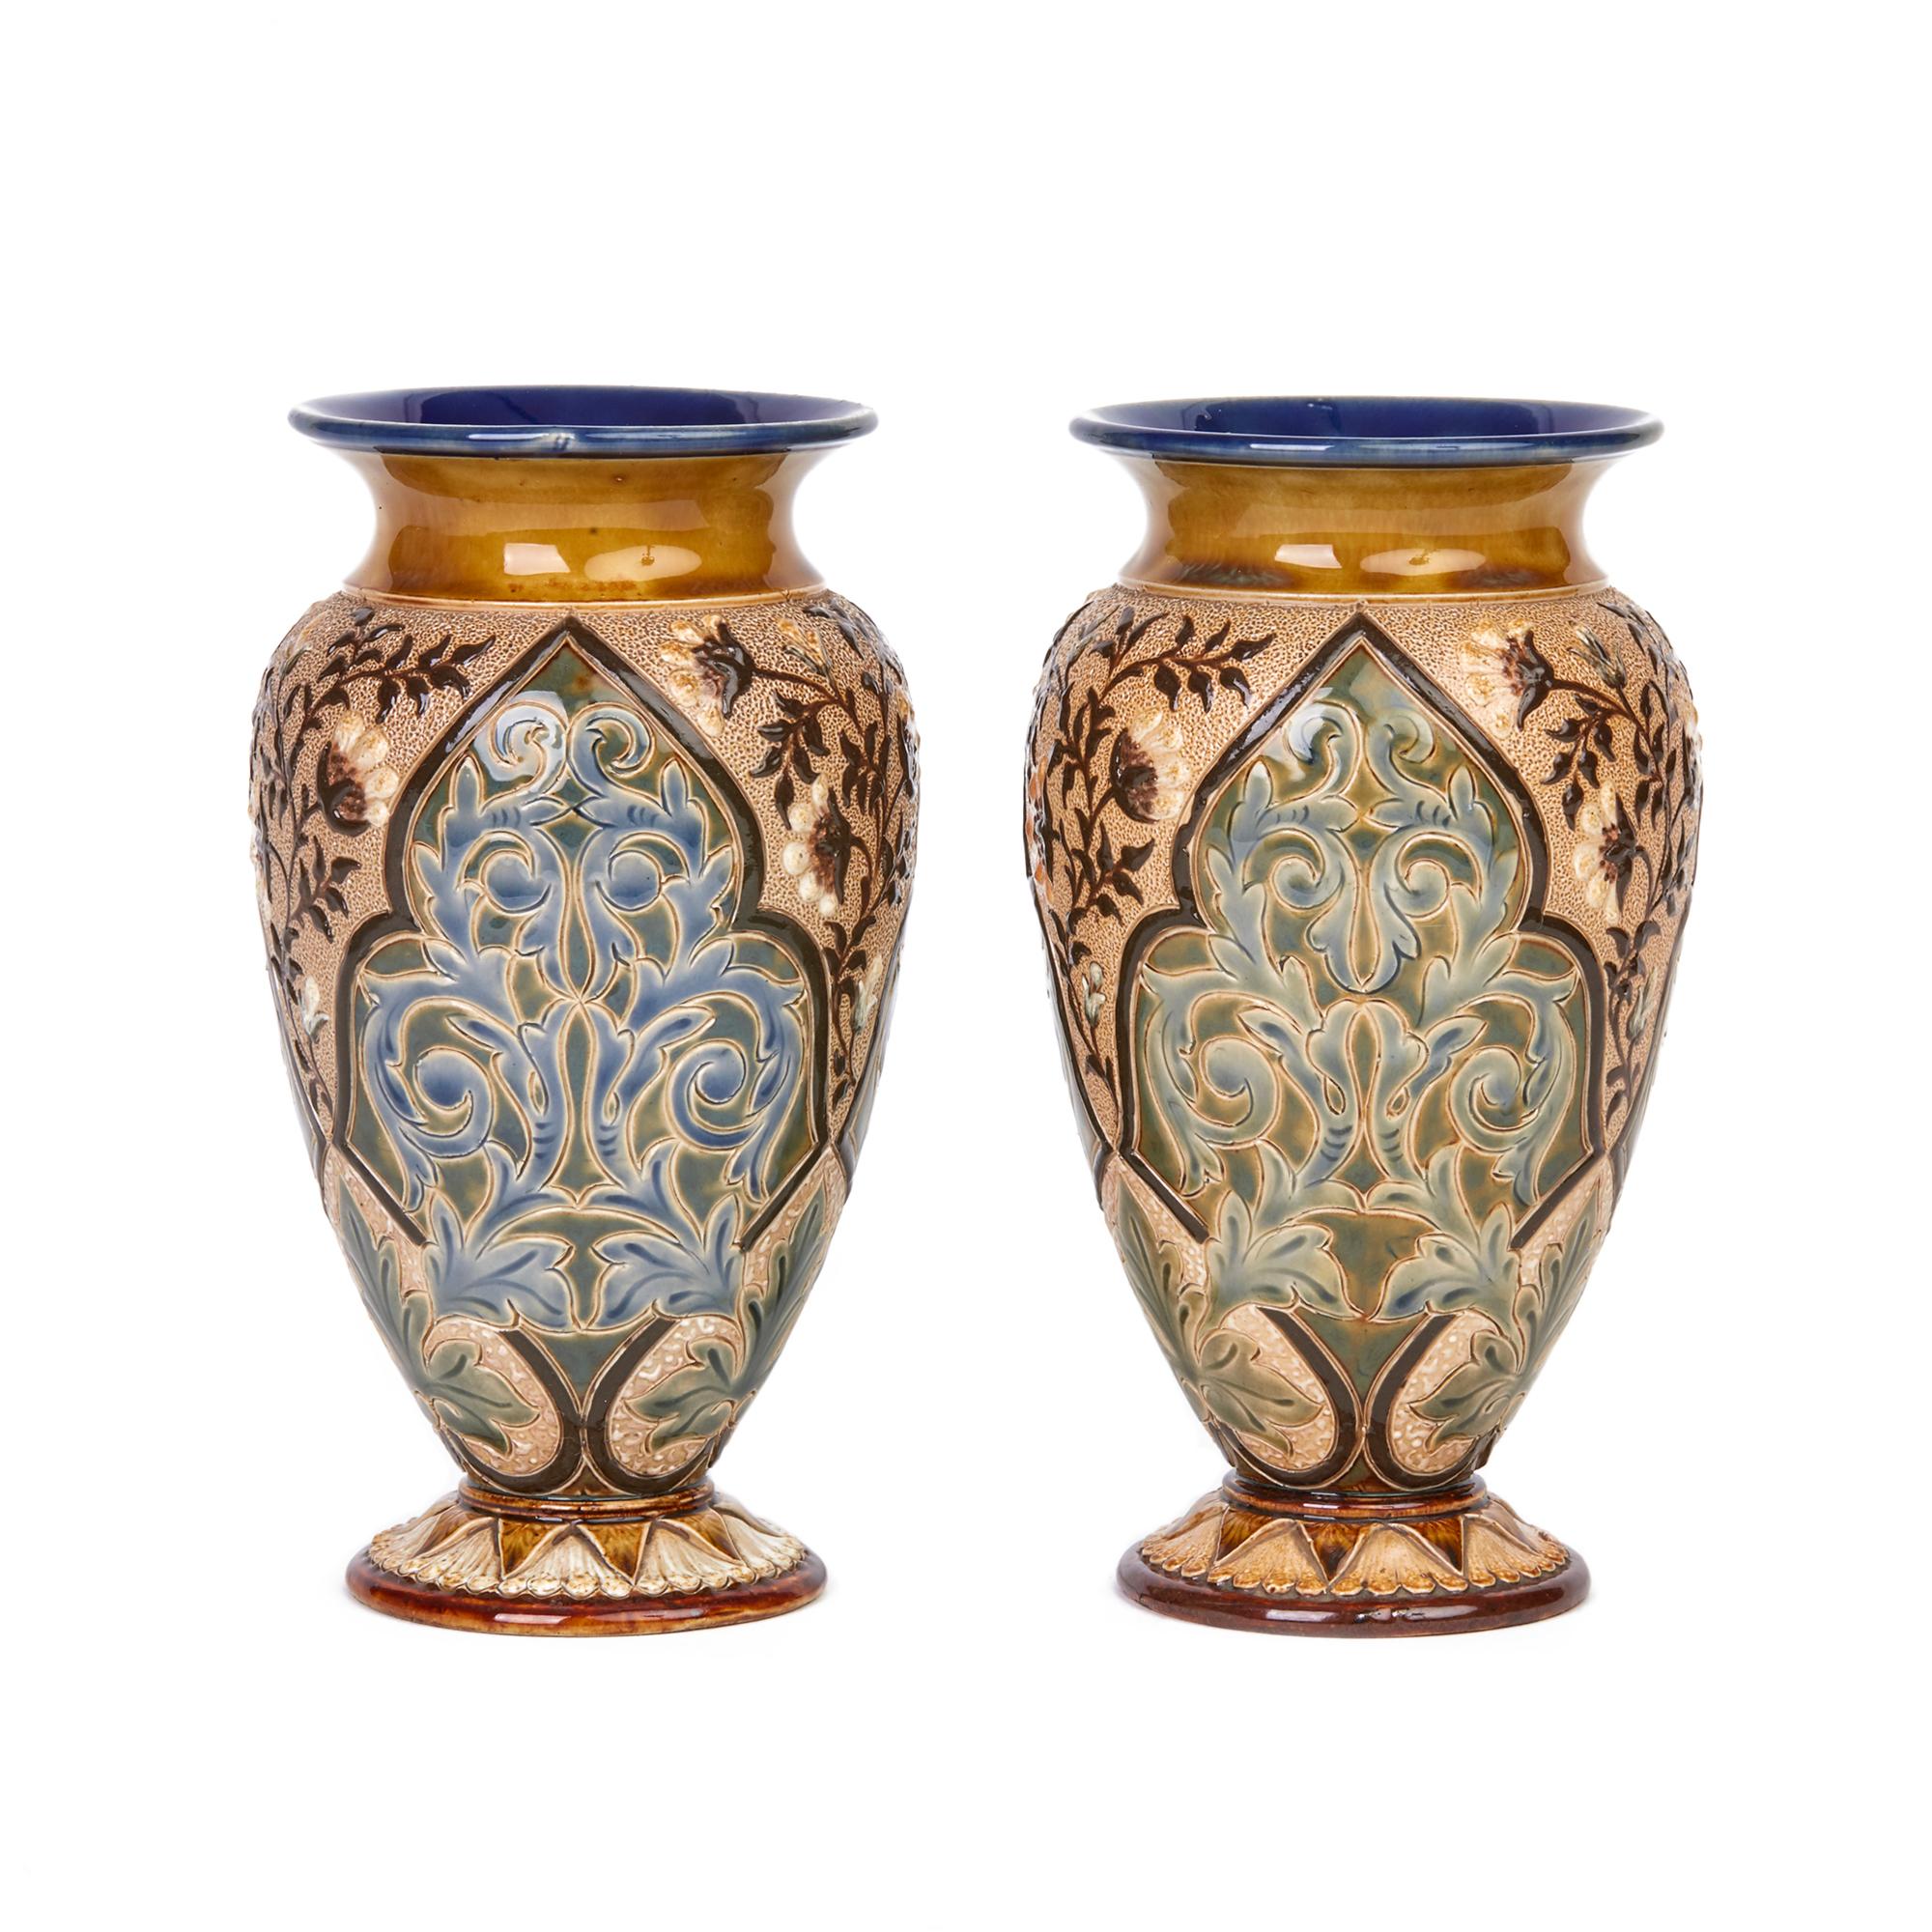 Doulton Lambeth Pair of Exceptional Art Pottery Vases by Alice Barker, 1883 4